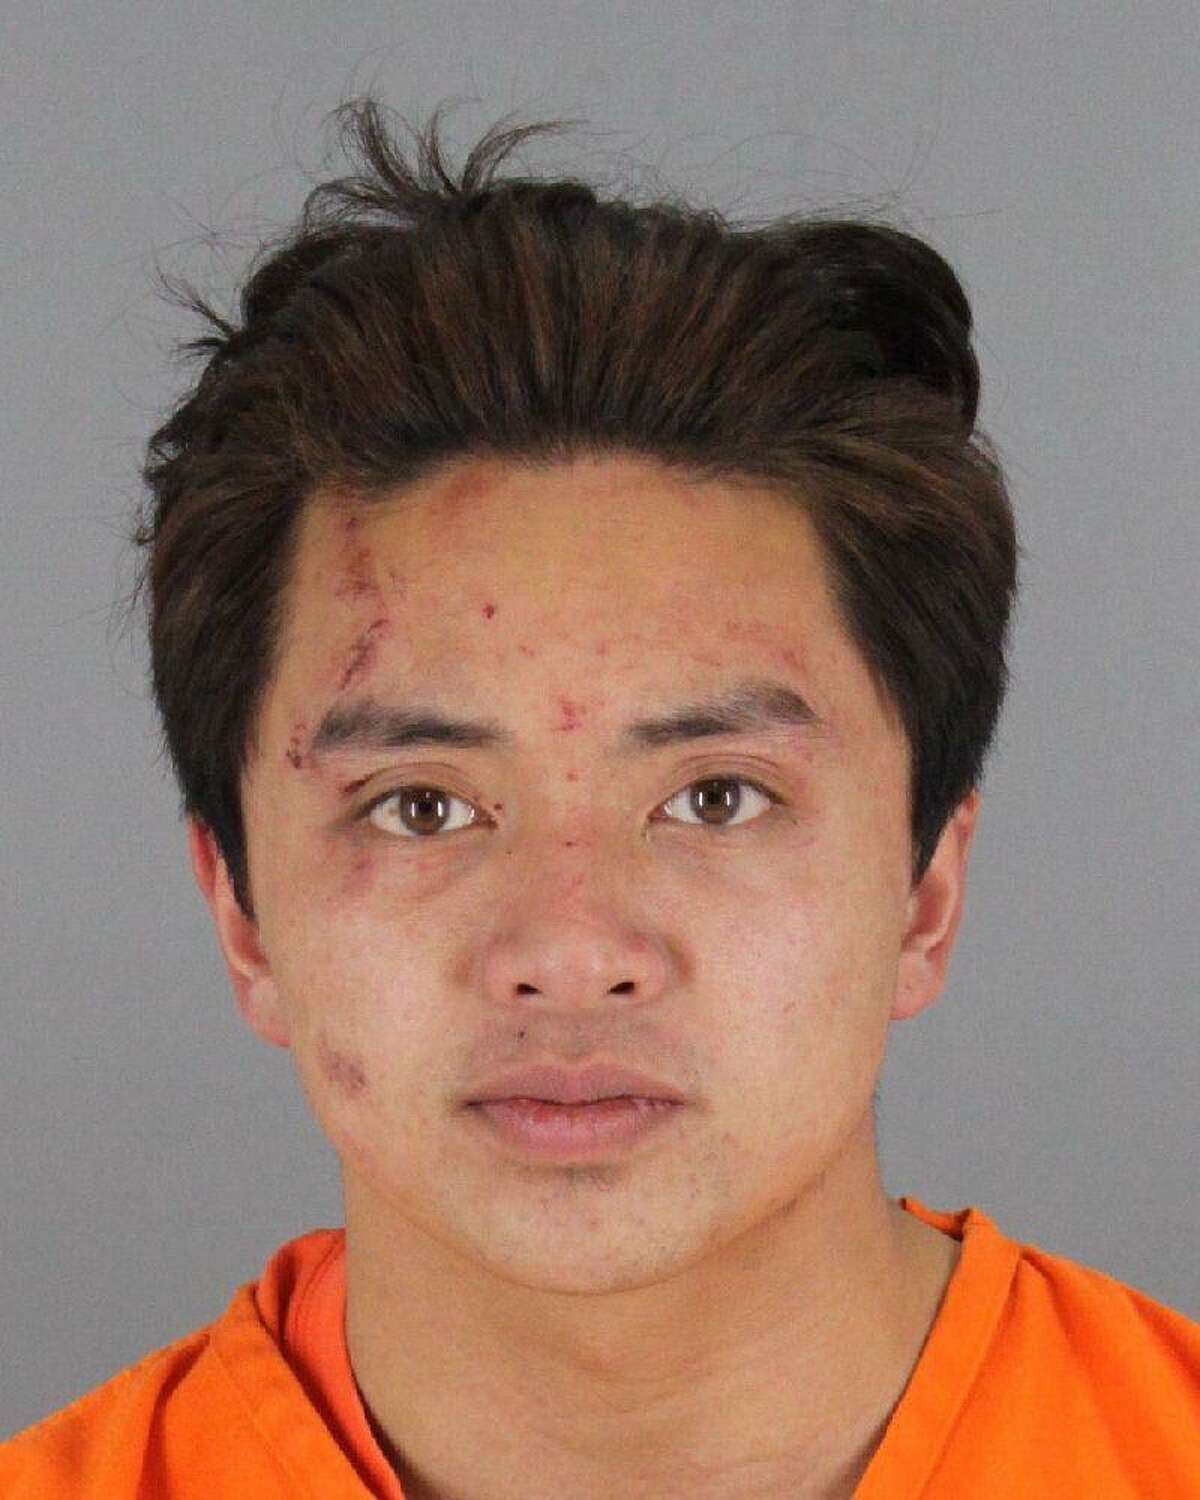 Frederick Tran, 24, was arrested on suspicion of killing his girlfriend, Ariana Hatami, in her Daly City Home.